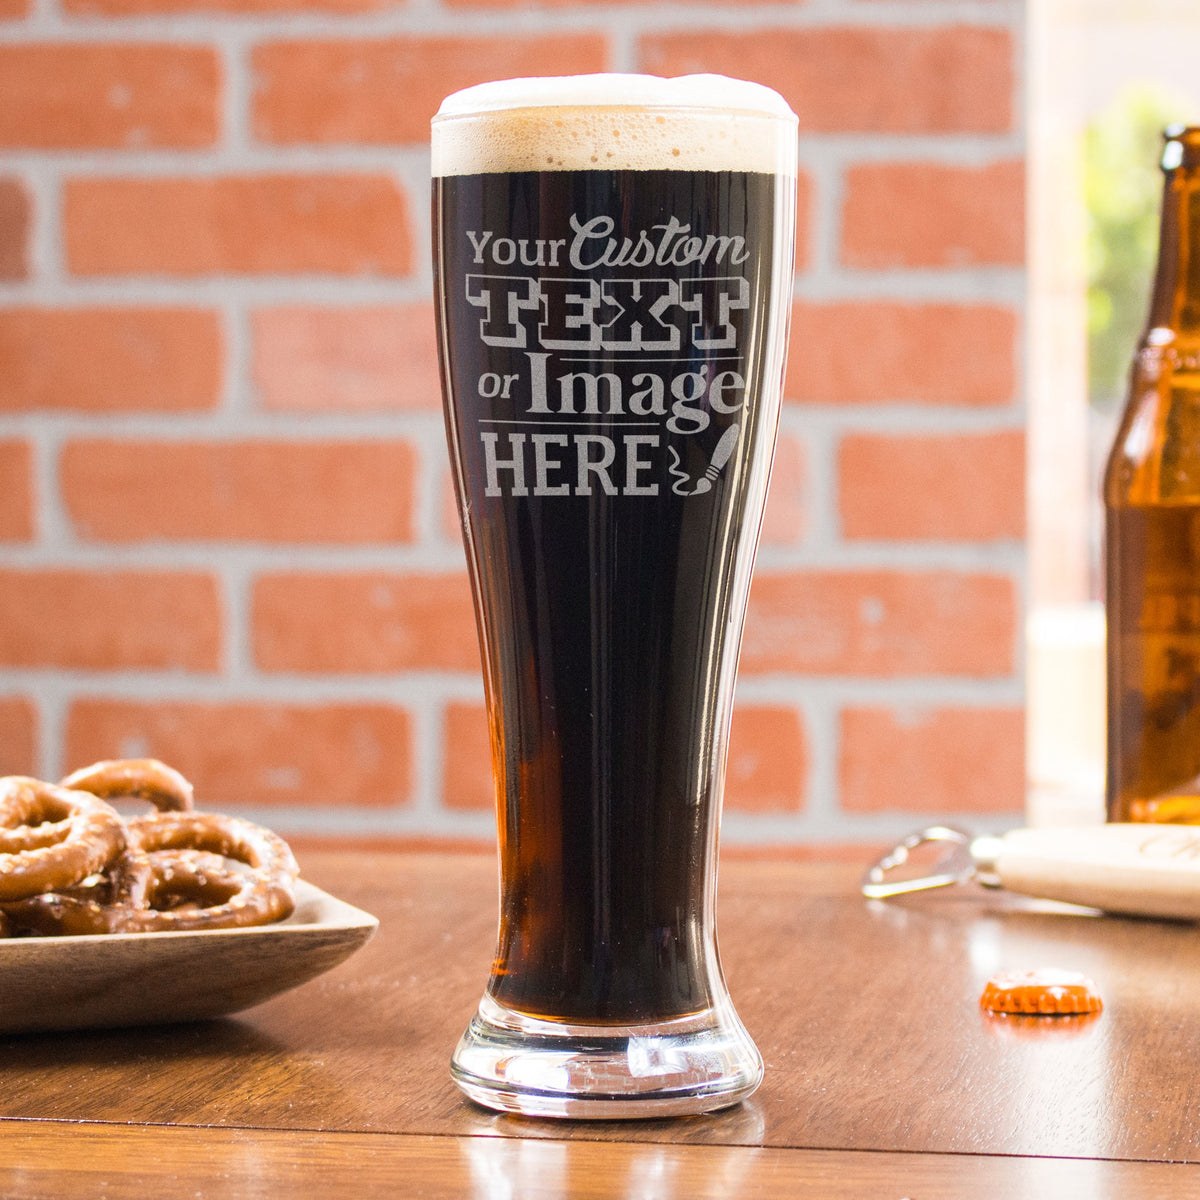 Personalized Pint Glass - Design: CUSTOM - Everything Etched